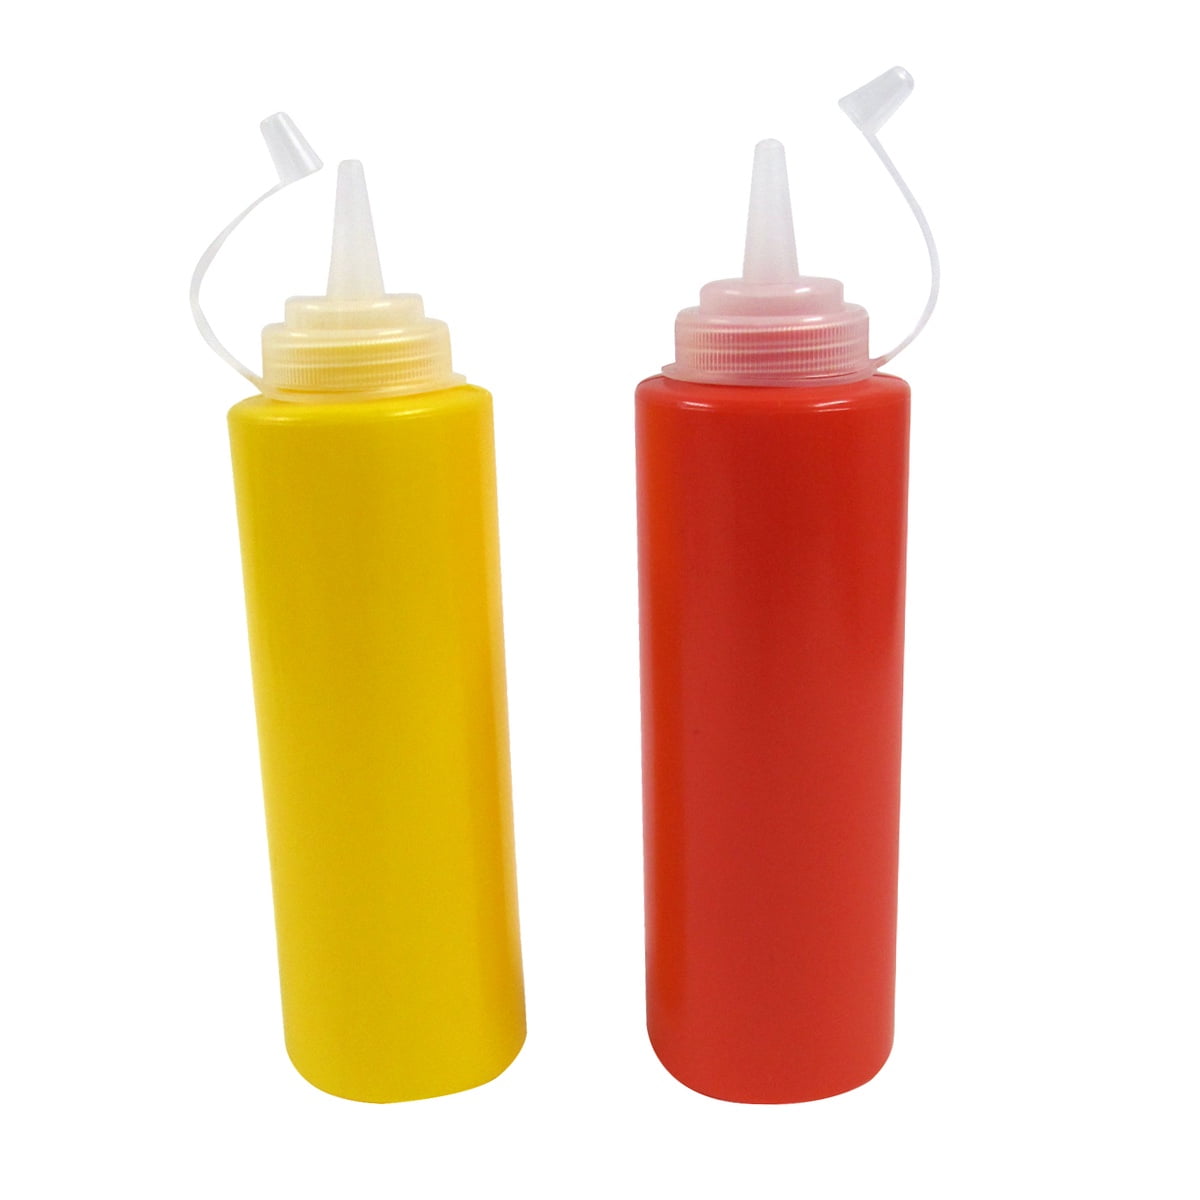 NEW TableCraft Commerical # 05840 Set of 3 Condiment Bottles Mustard Ketchup BBQ 